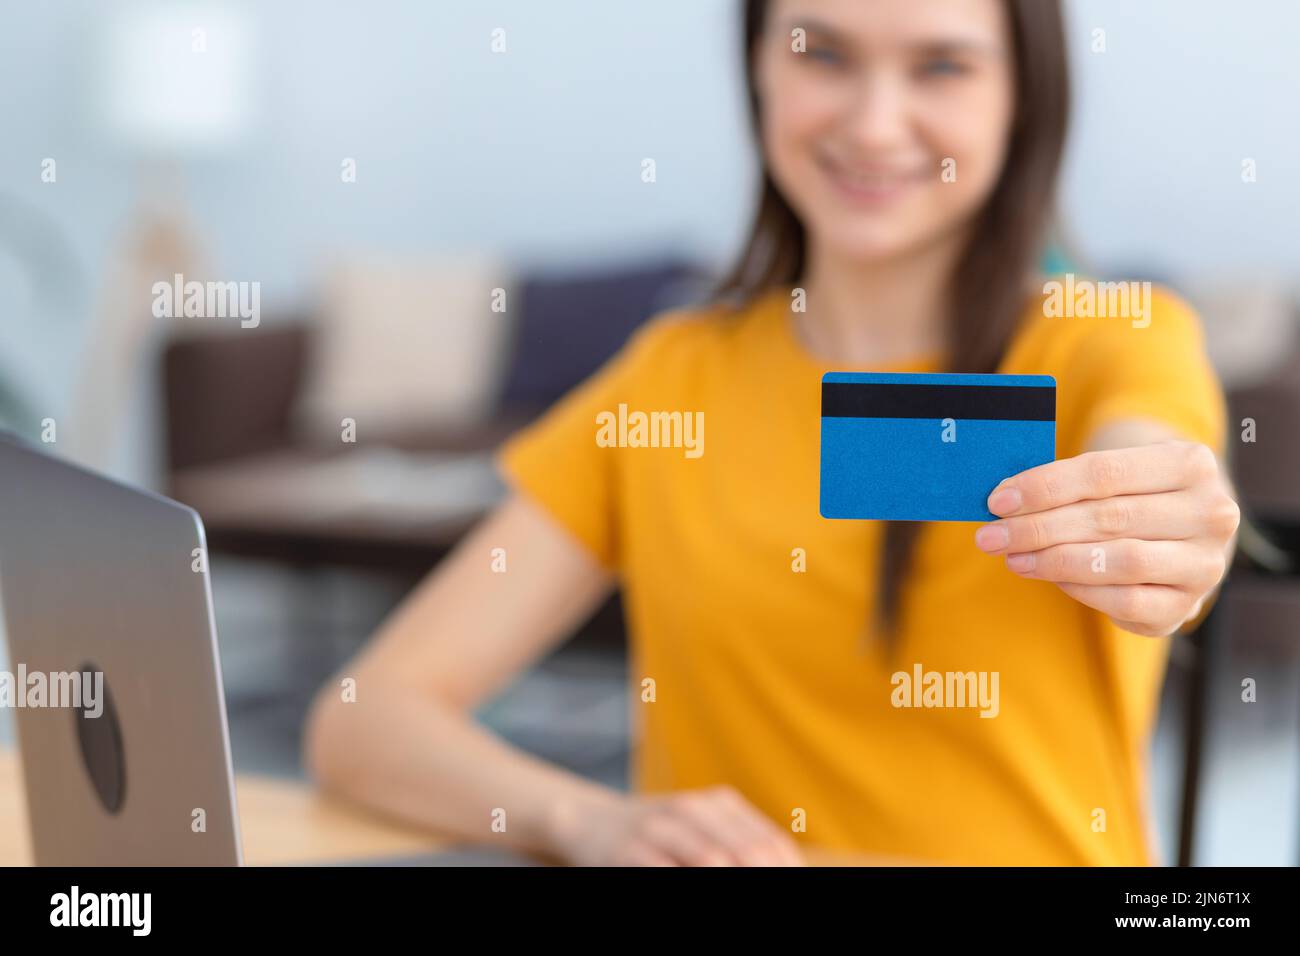 bank credit card in female hands Online shopping secure internet banking Stock Photo